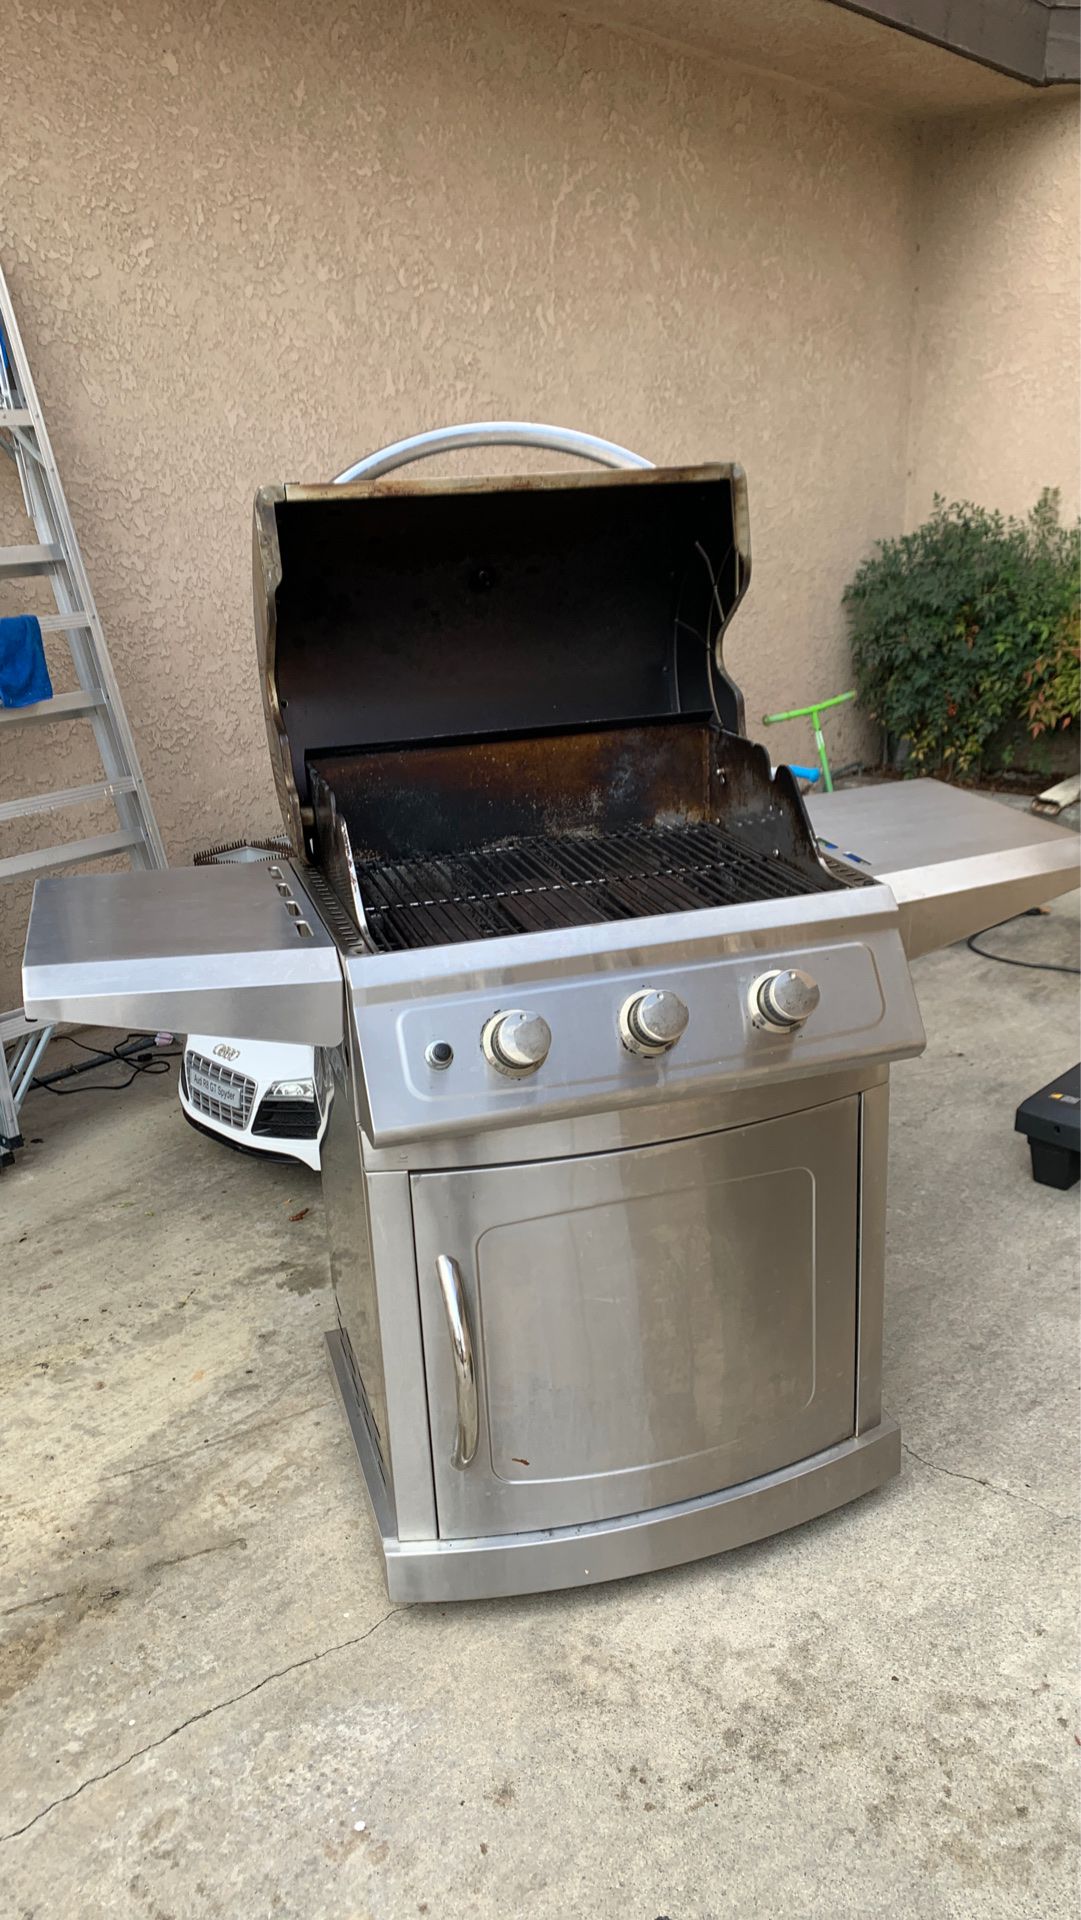 Propane gas grill from COSCO AND 2 propane tanks included